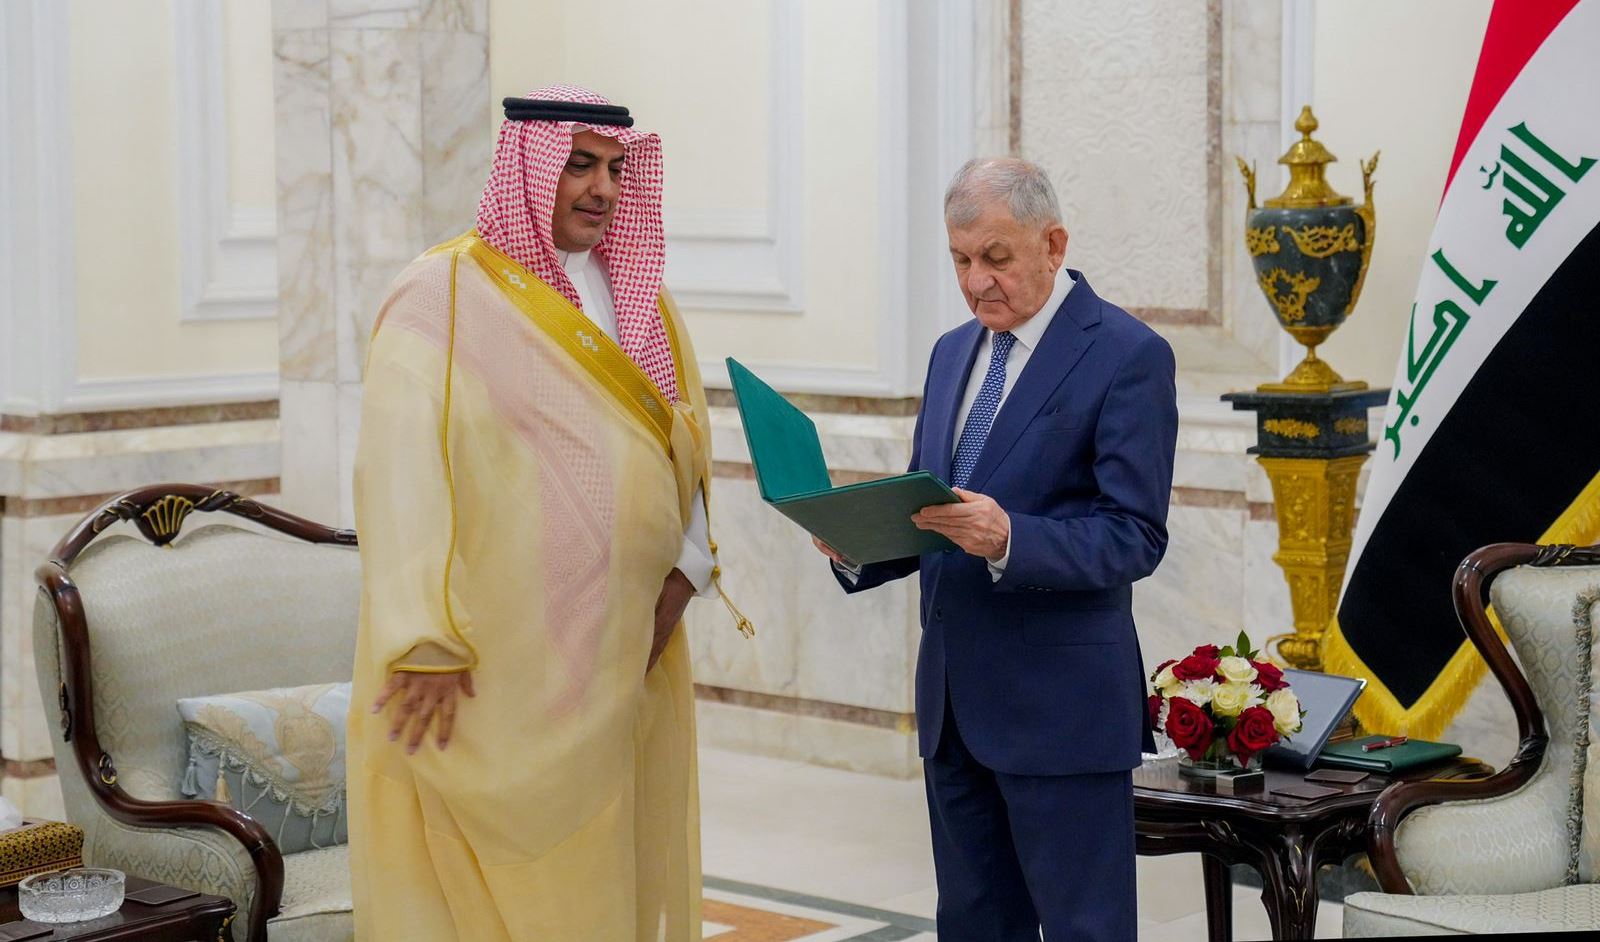 Saudi King expresses commitment to stronger ties with Iraq in letter to Iraqi President